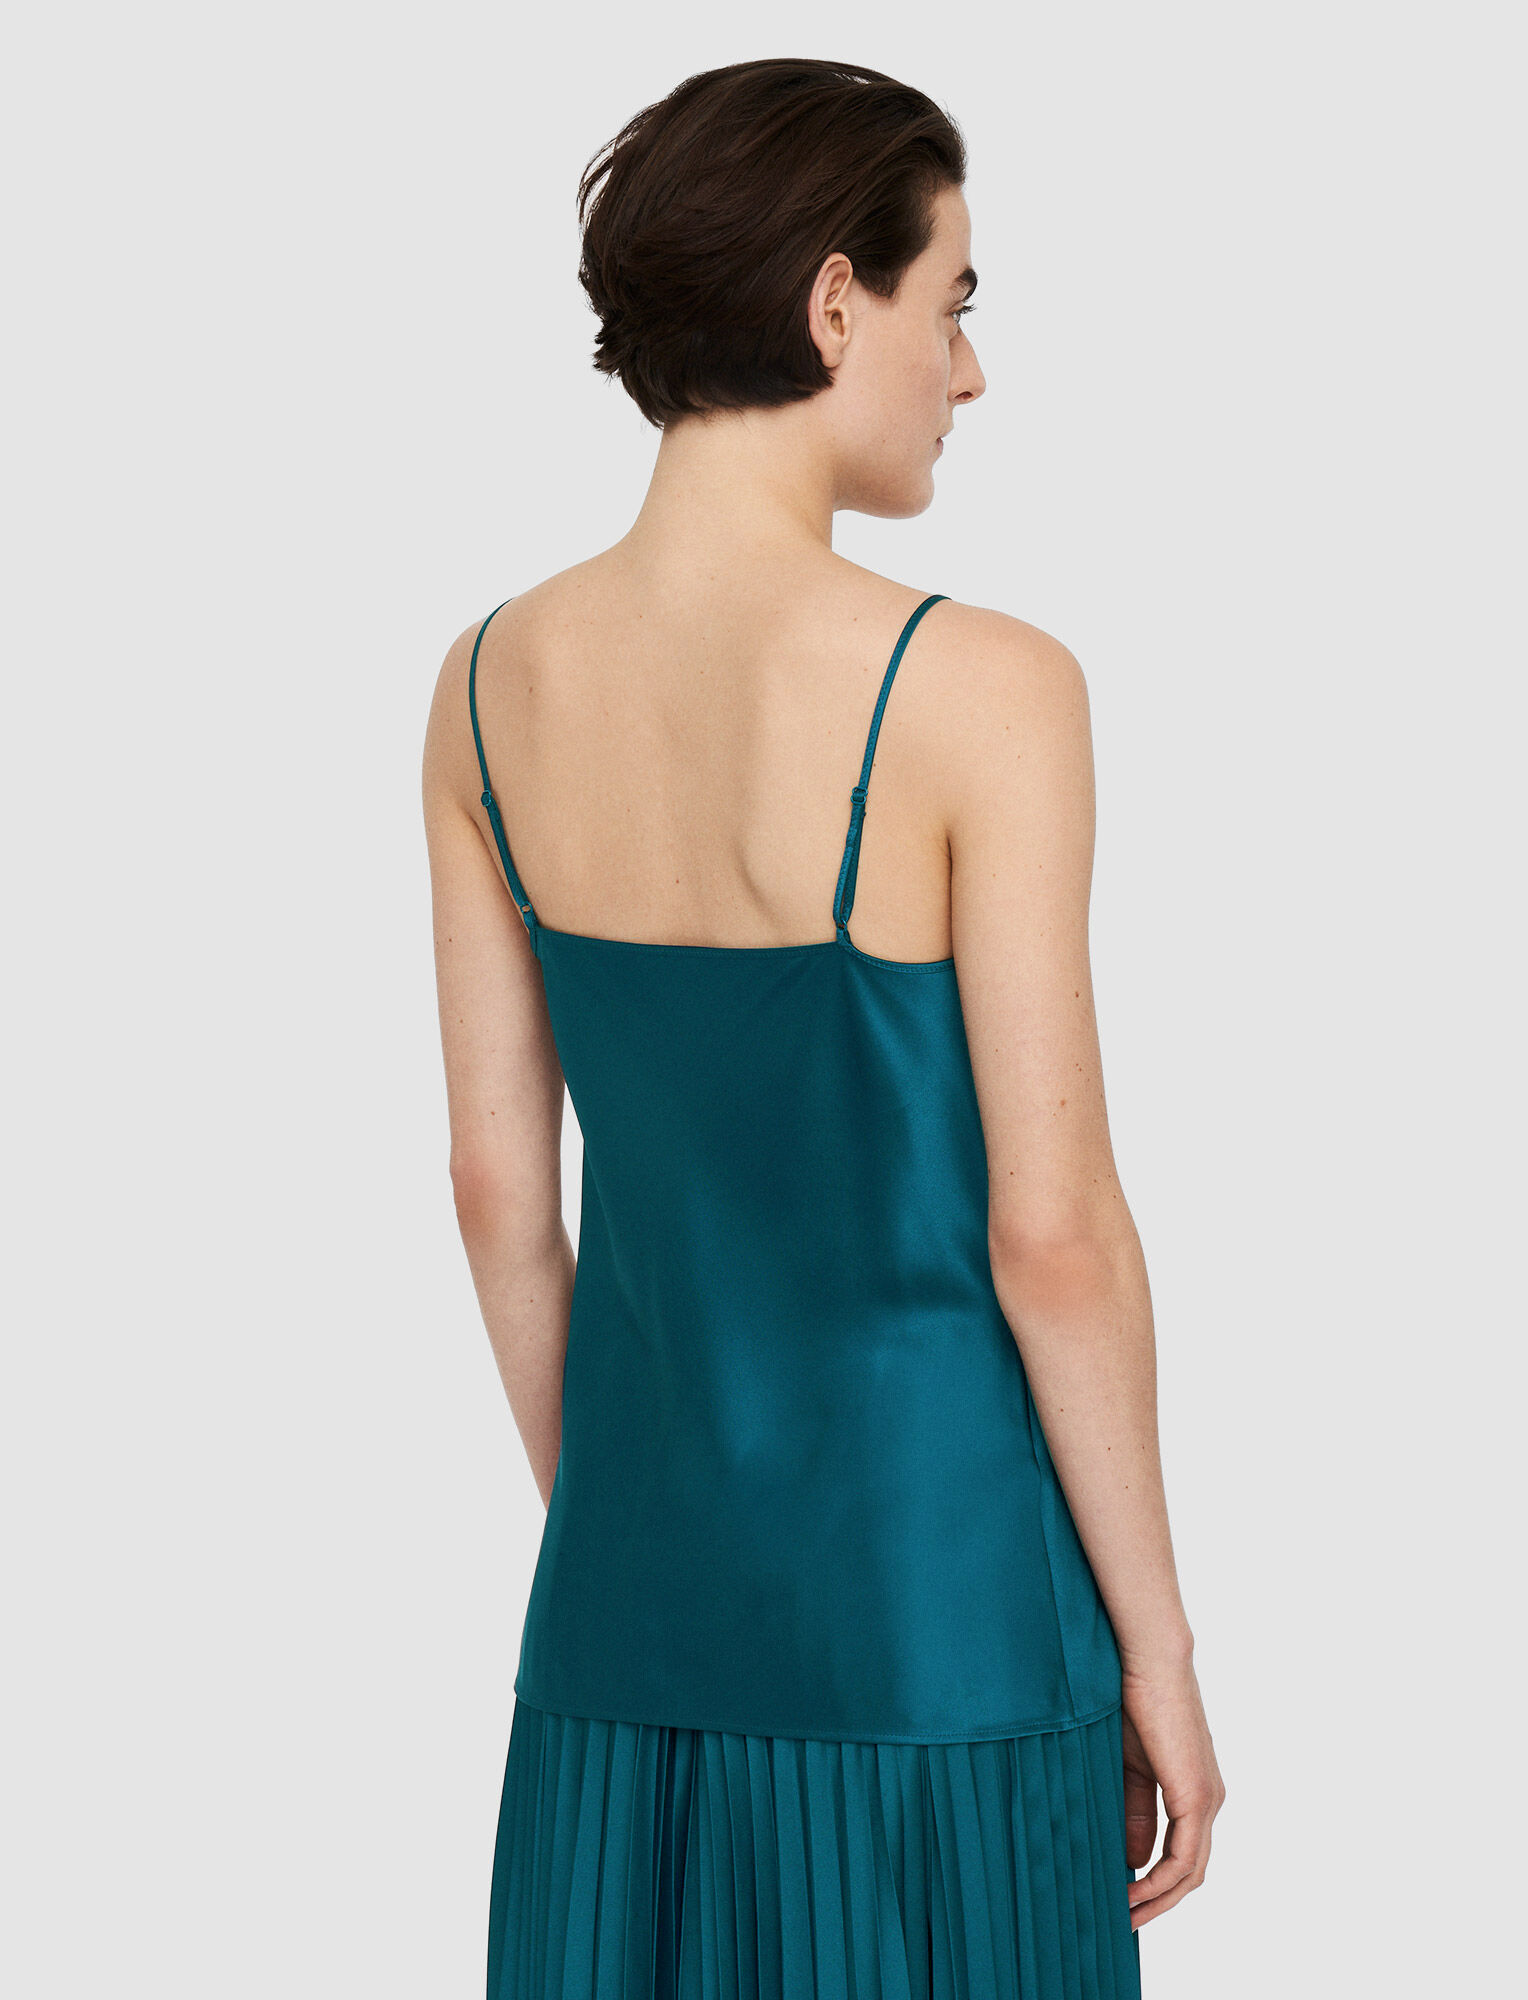 Light and comfortable on the skin, this camisole is rich in colour and has a smooth and seamless finish.